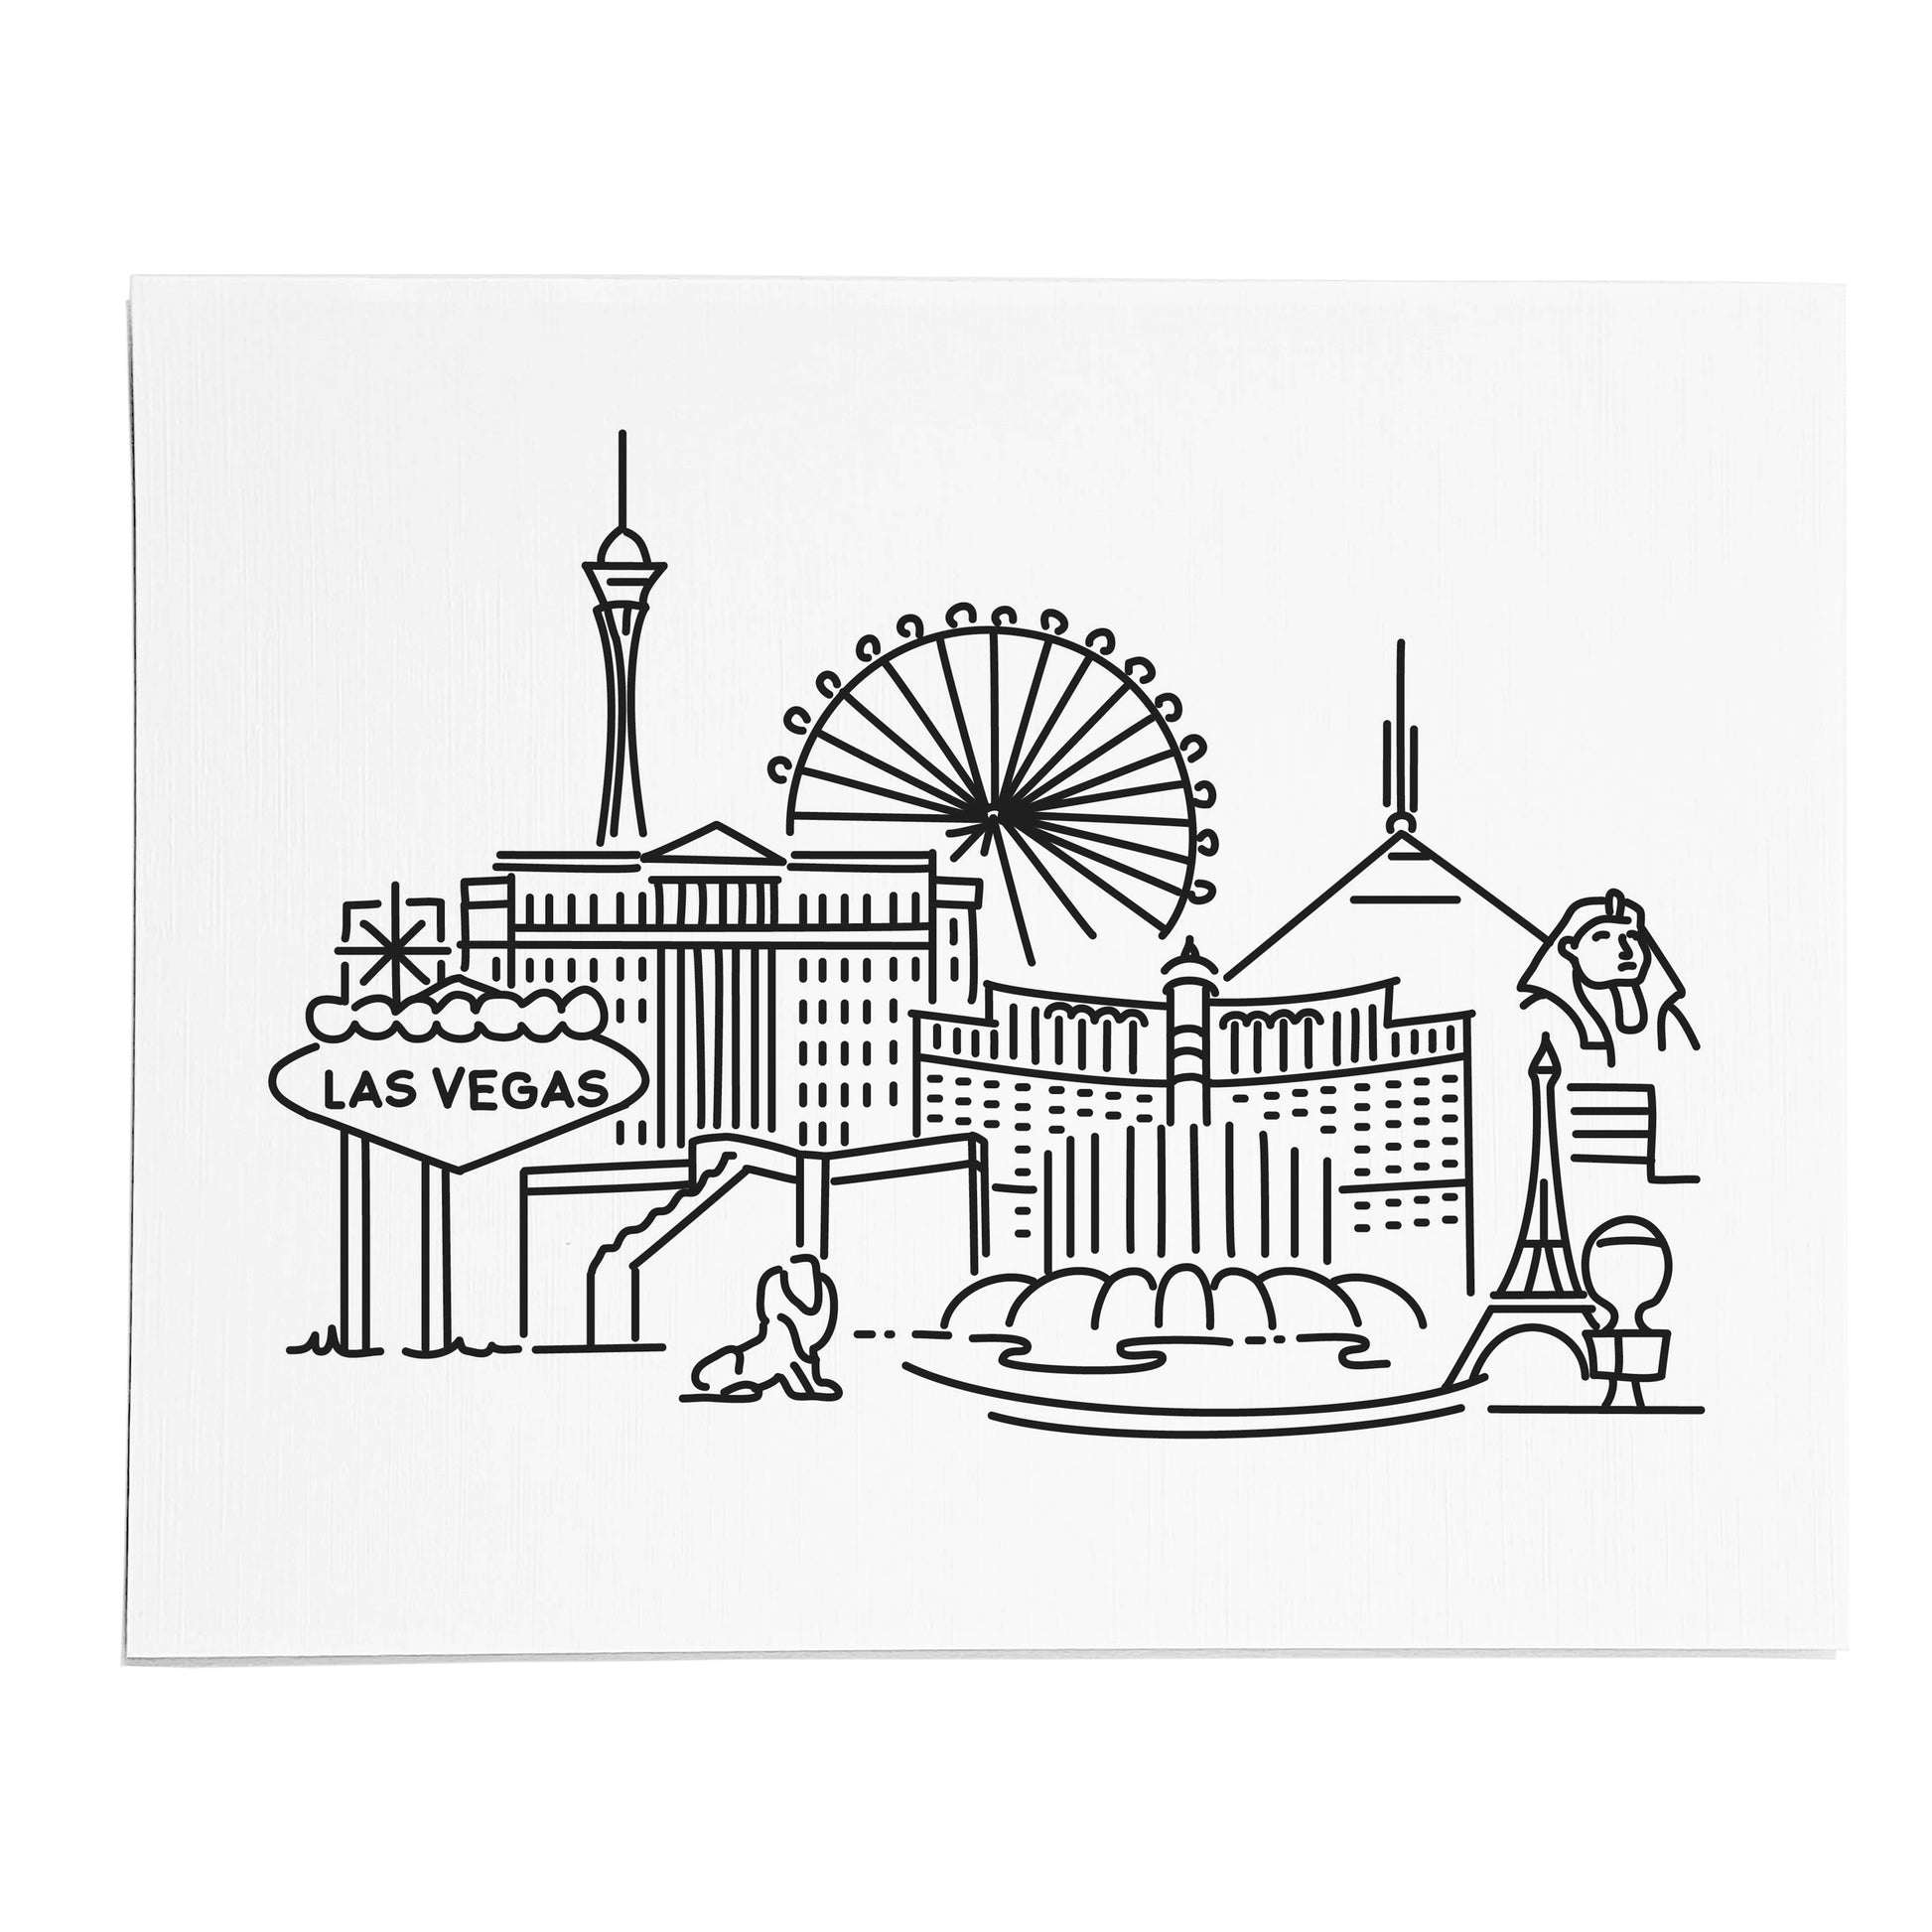 An art print featuring a line drawing of the Las Vegas Skyline on white linen paper